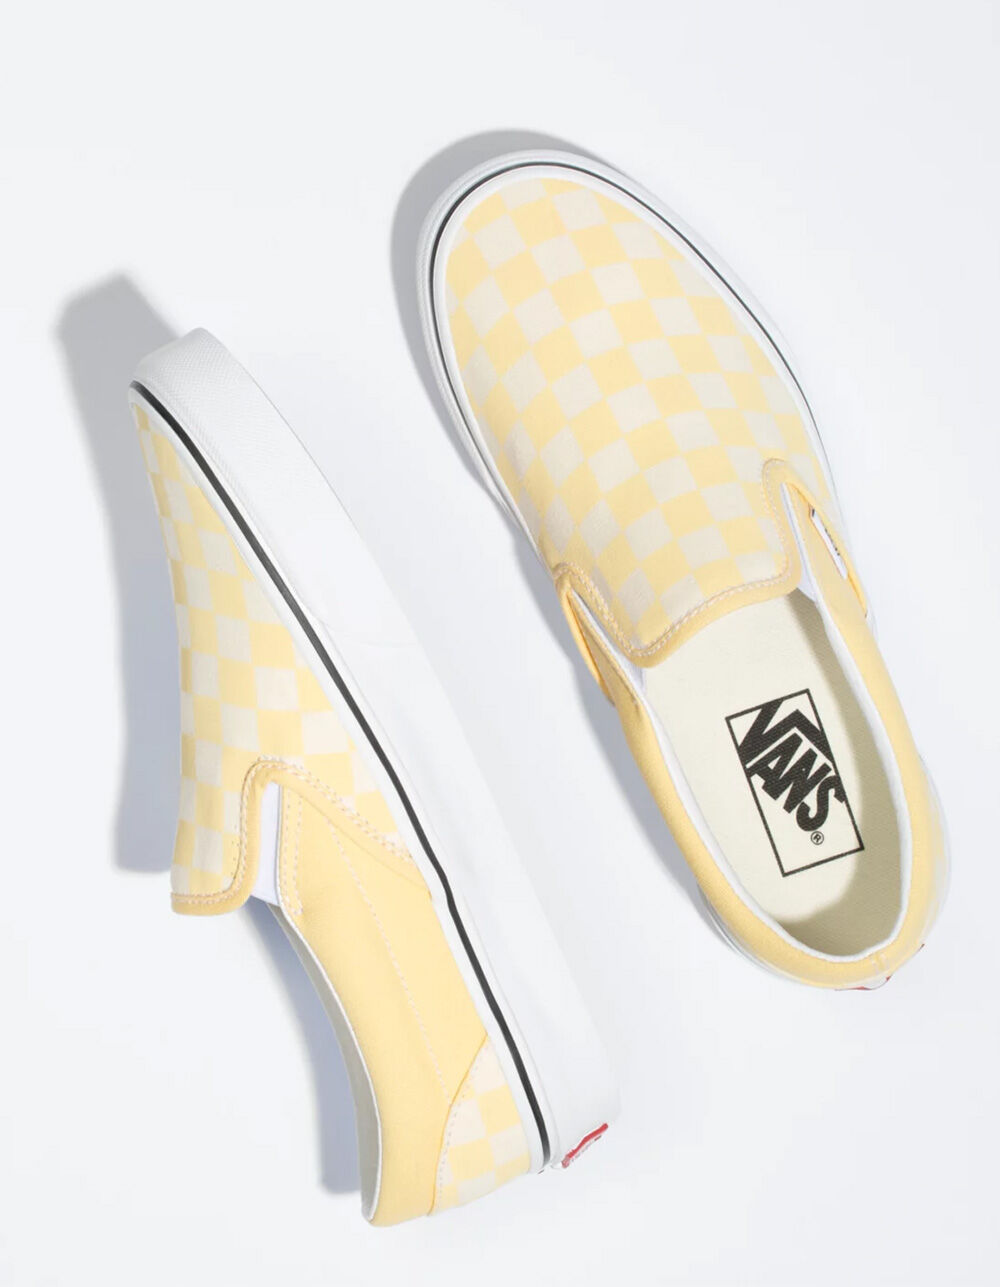 Vans Yellow Checkered Slip On Size 5.5 - $30 (40% Off Retail) - From Alexis